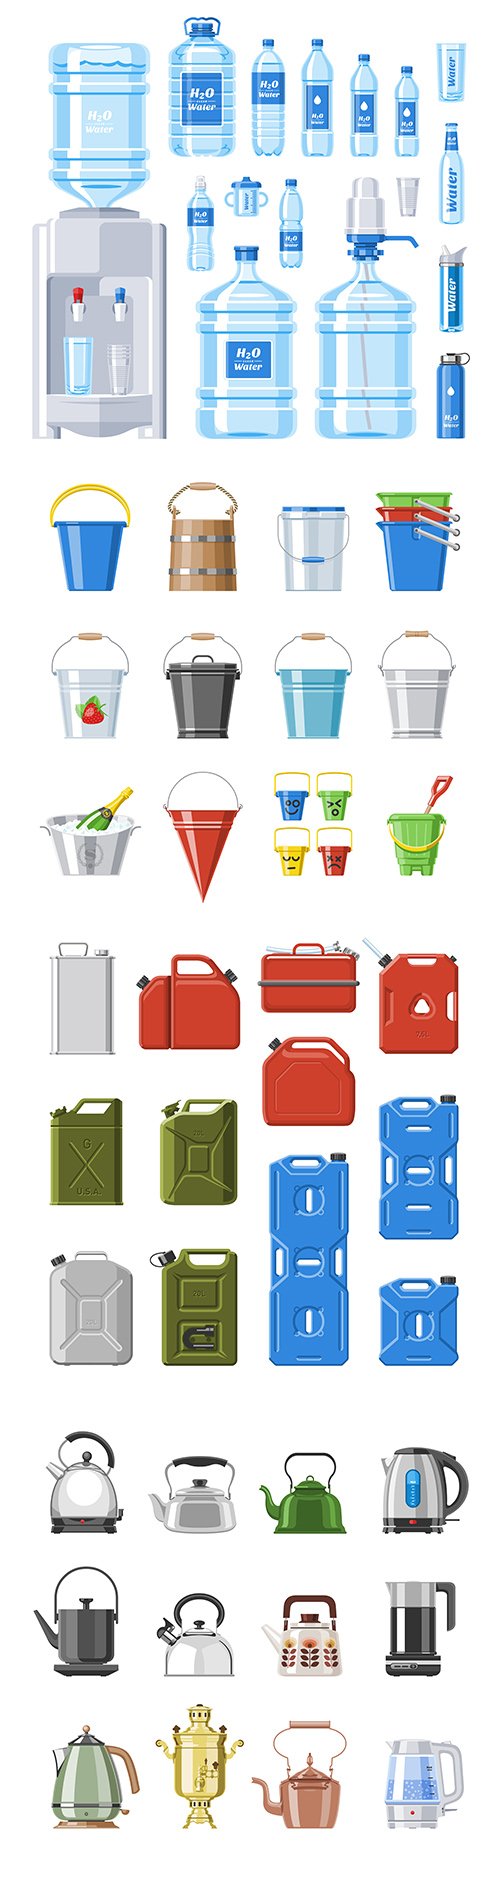 Bottle water, bucket and kettle collection vector illustrations